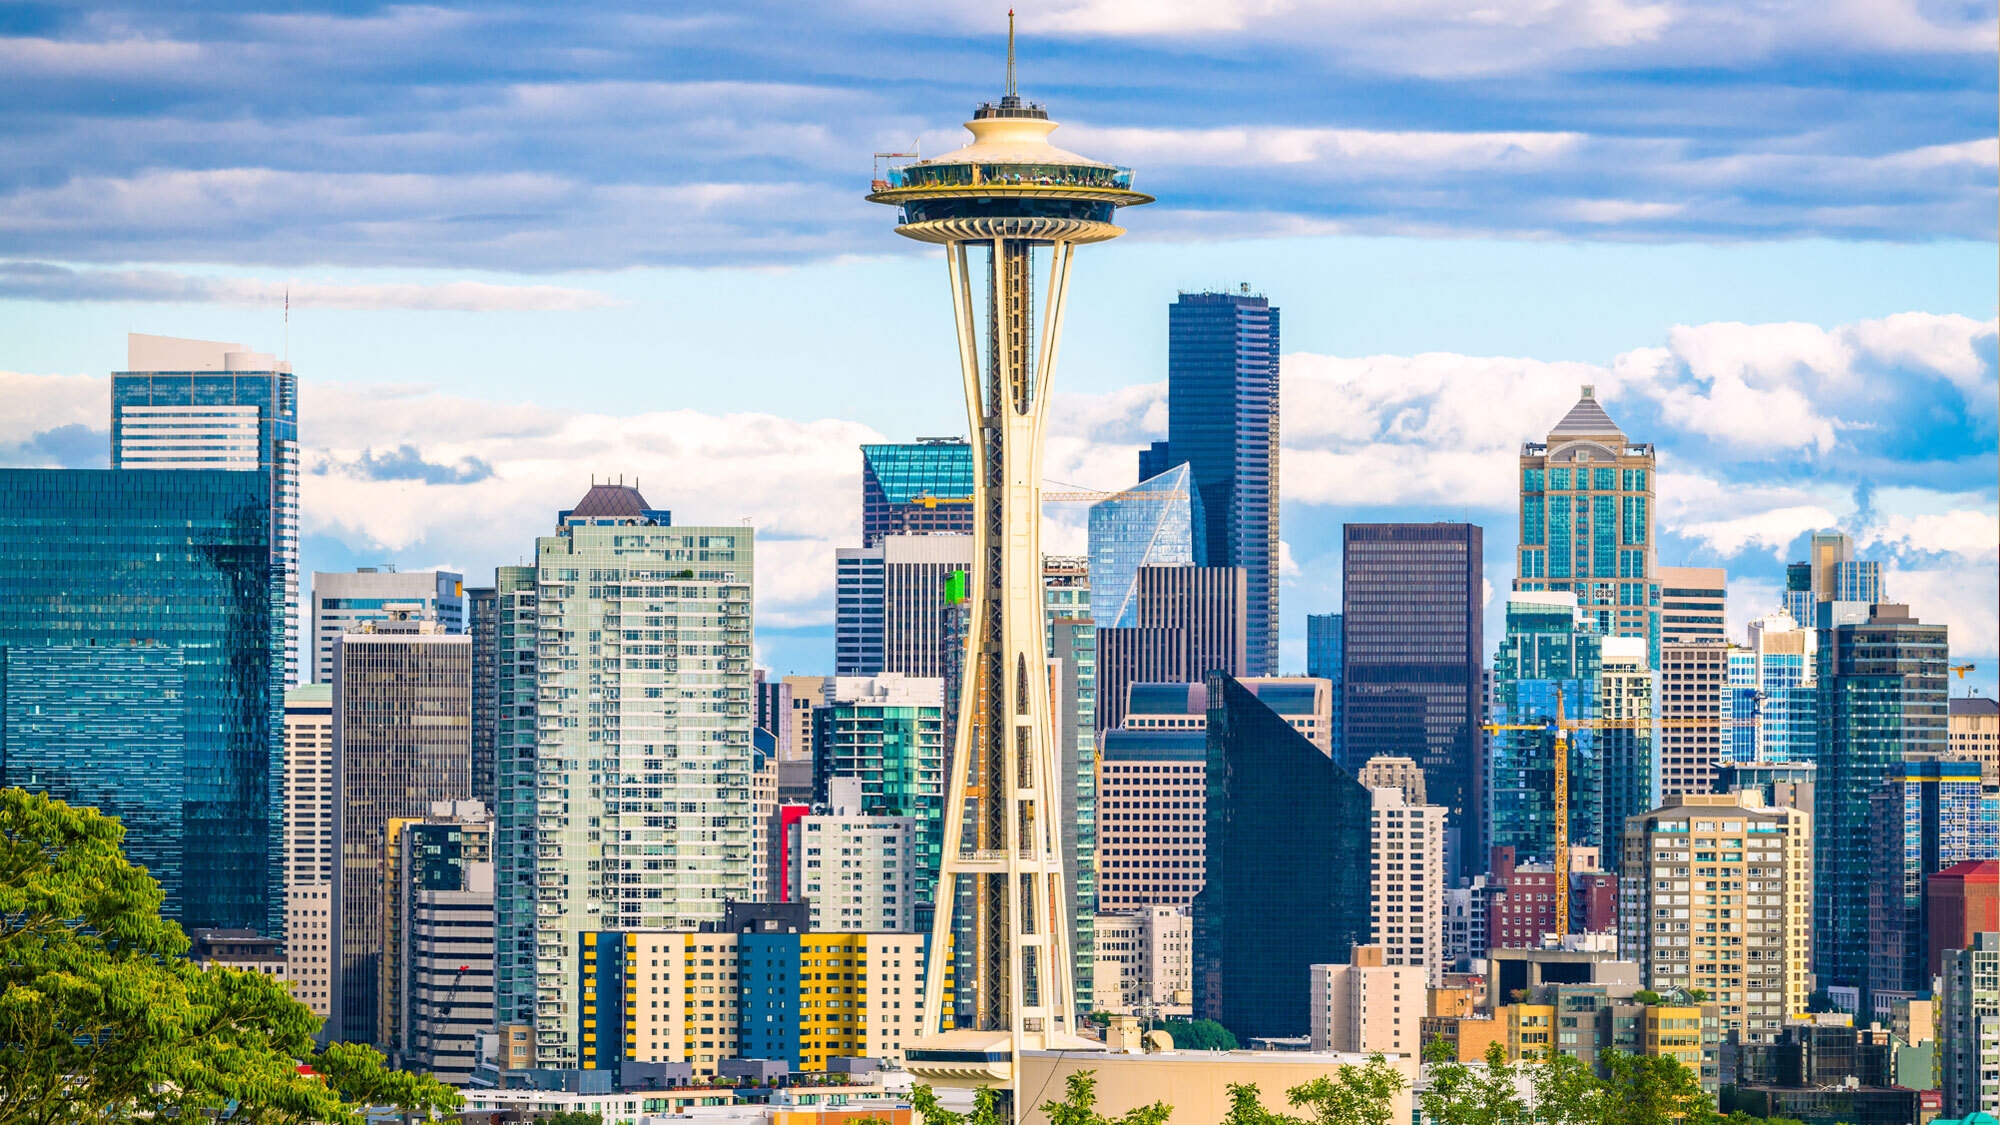 An image of the Seattle skyline